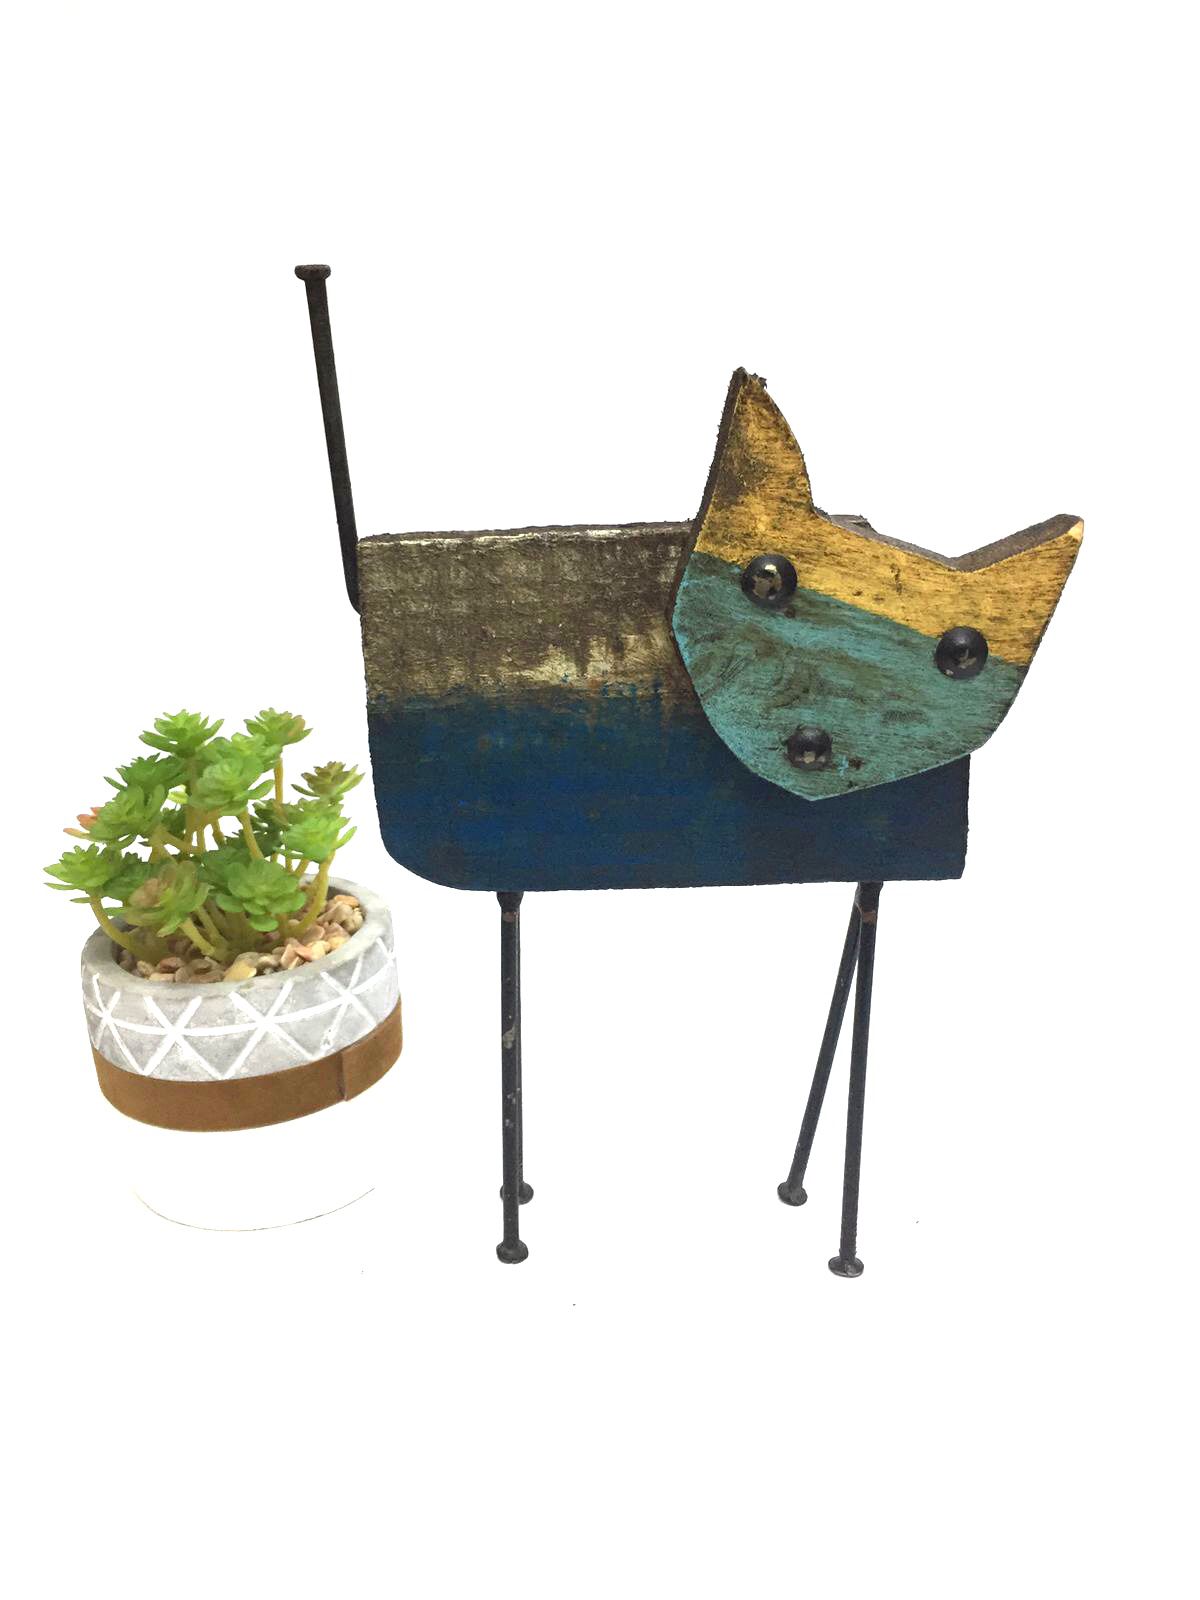 Animals With Recycled Wood & Wrought Iron Rusty Finish From Tamrapatra